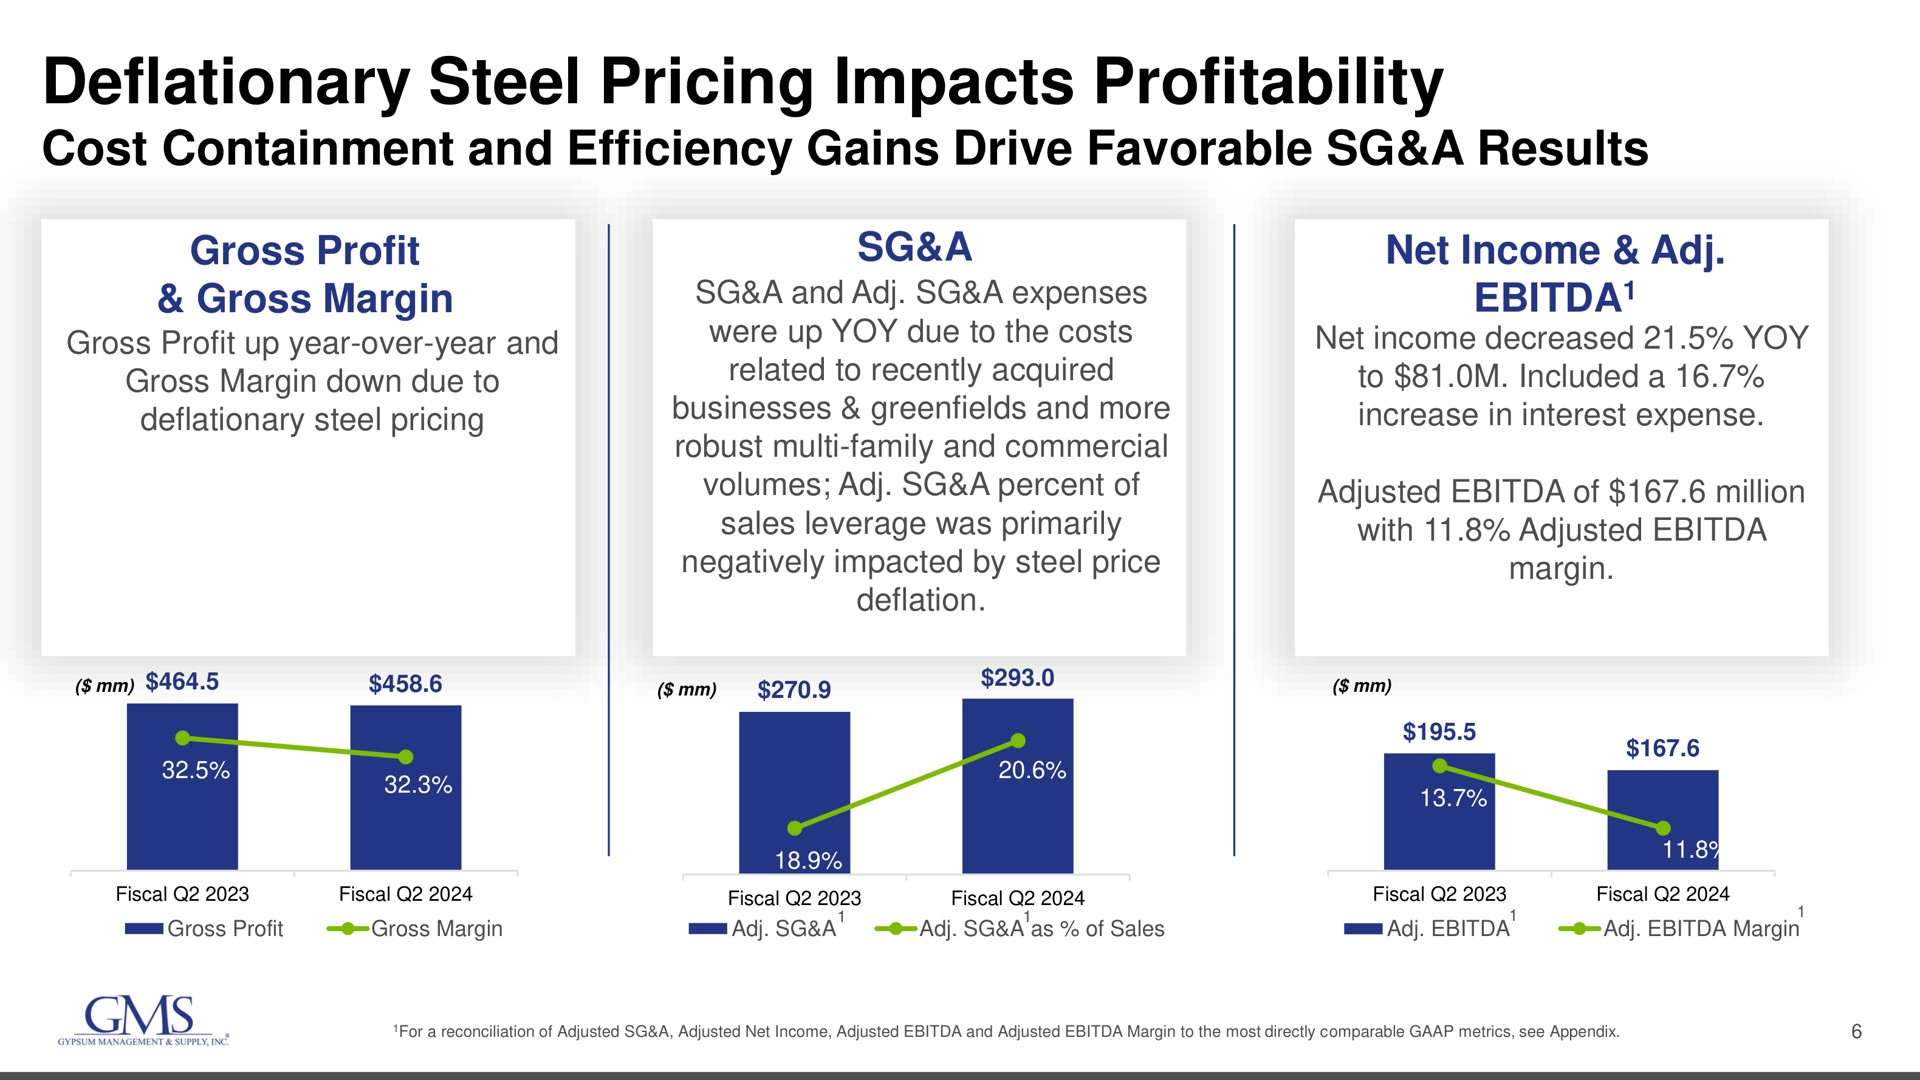 deflationary steel pricing impacts profitability cost containment and efficiency gains drive favorable a results | GMS